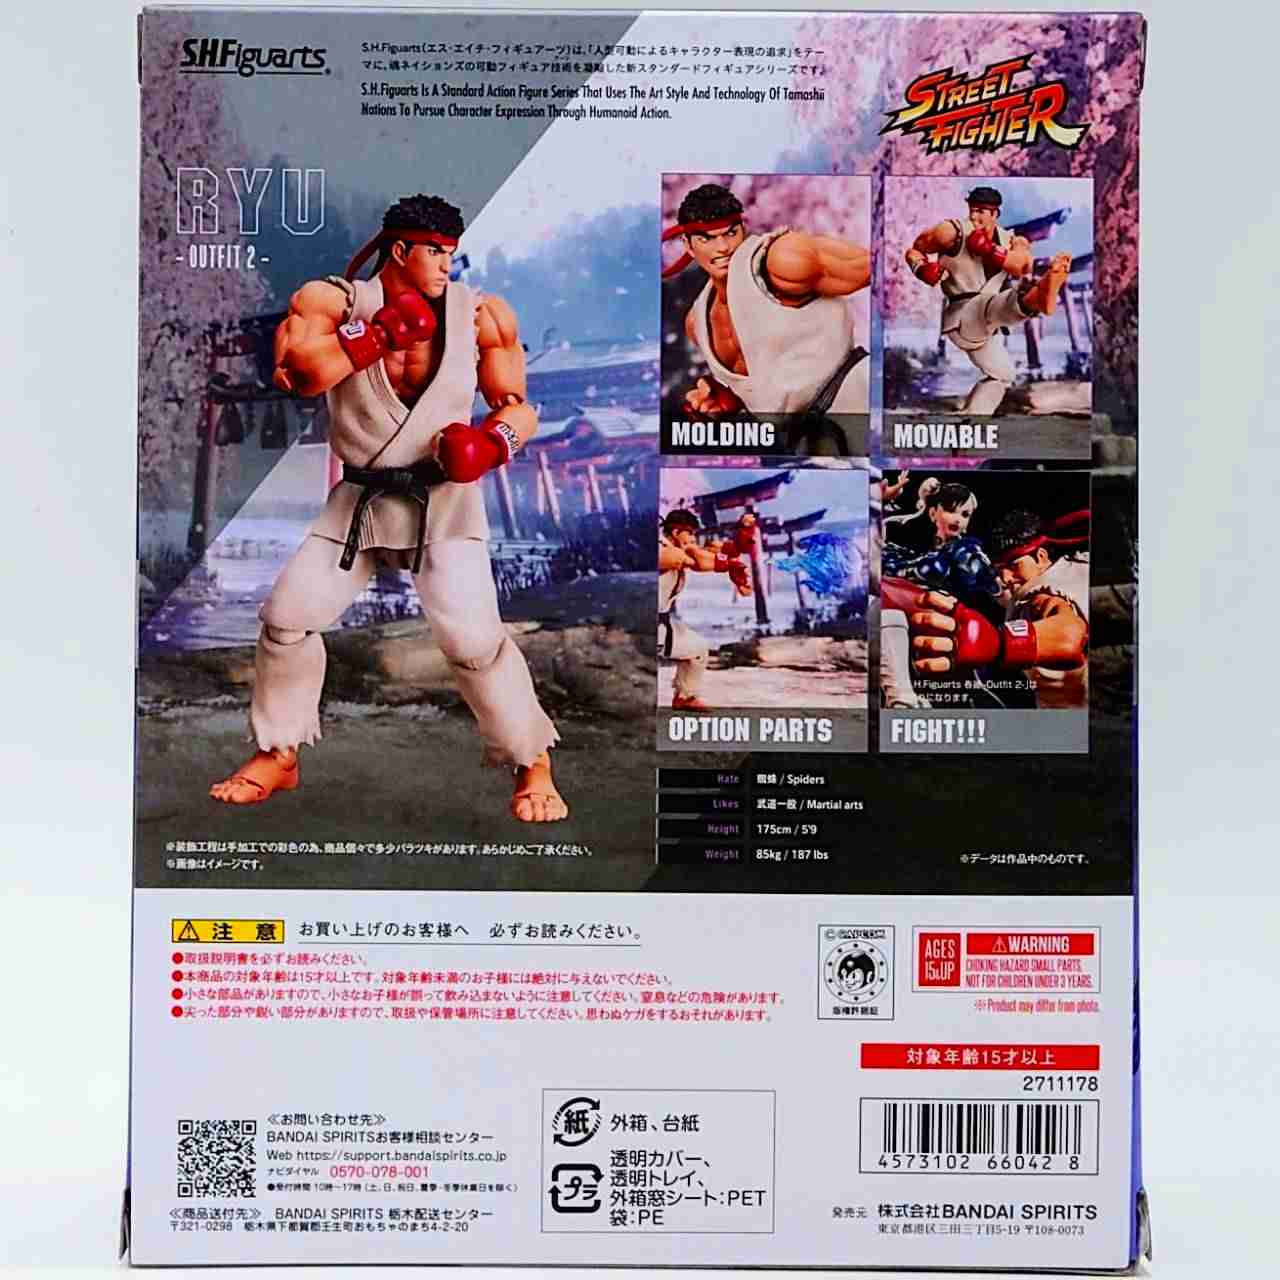 S.H.Figuarts Ryu Outfit 2